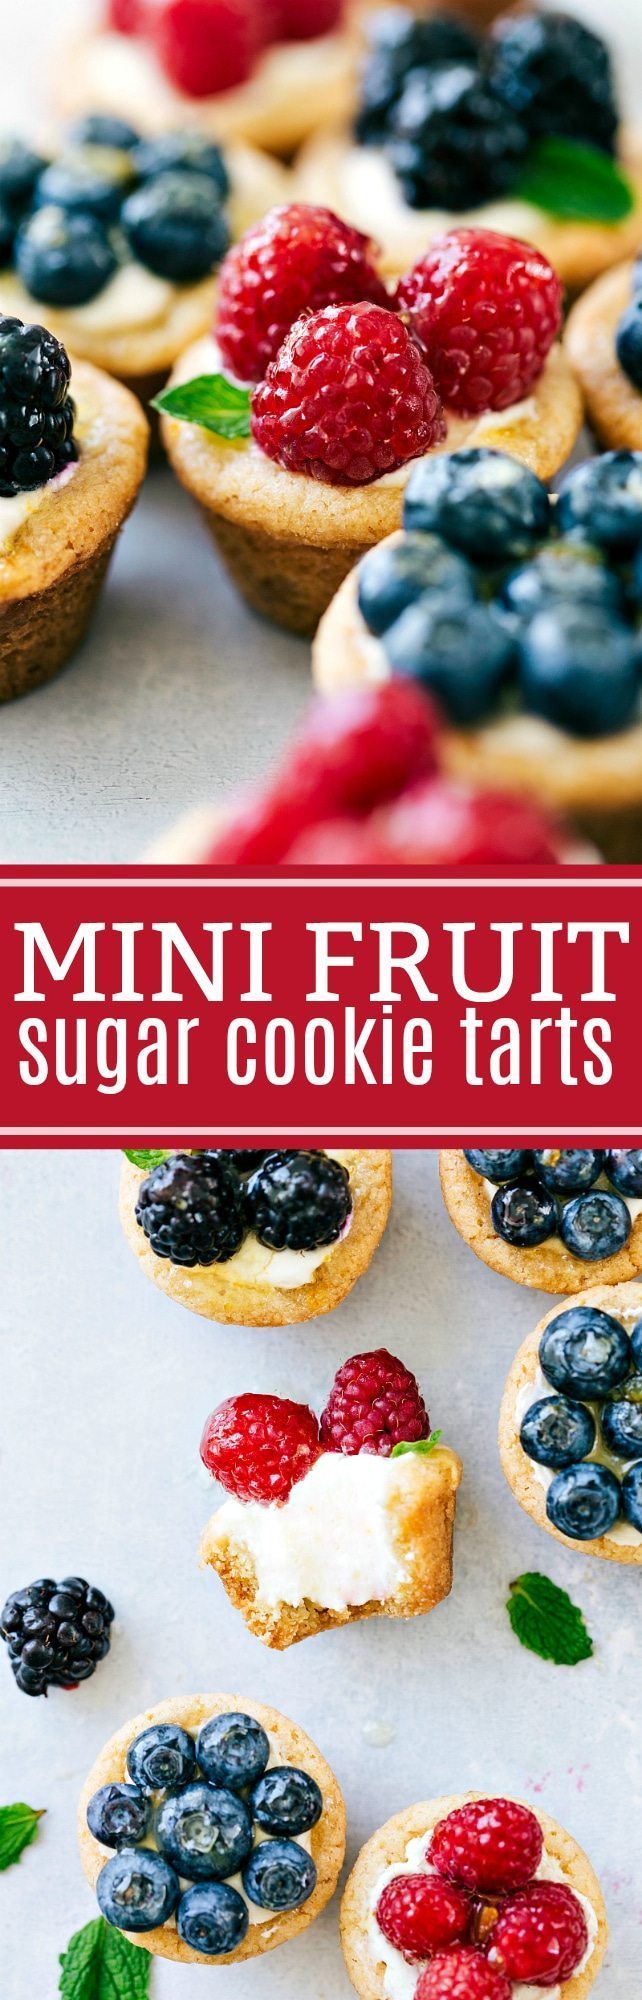 The ultimate BEST EVER miniature sugar cookie tarts with cream cheese filling and glazed fruit topping! via chelseasmessyapron.com